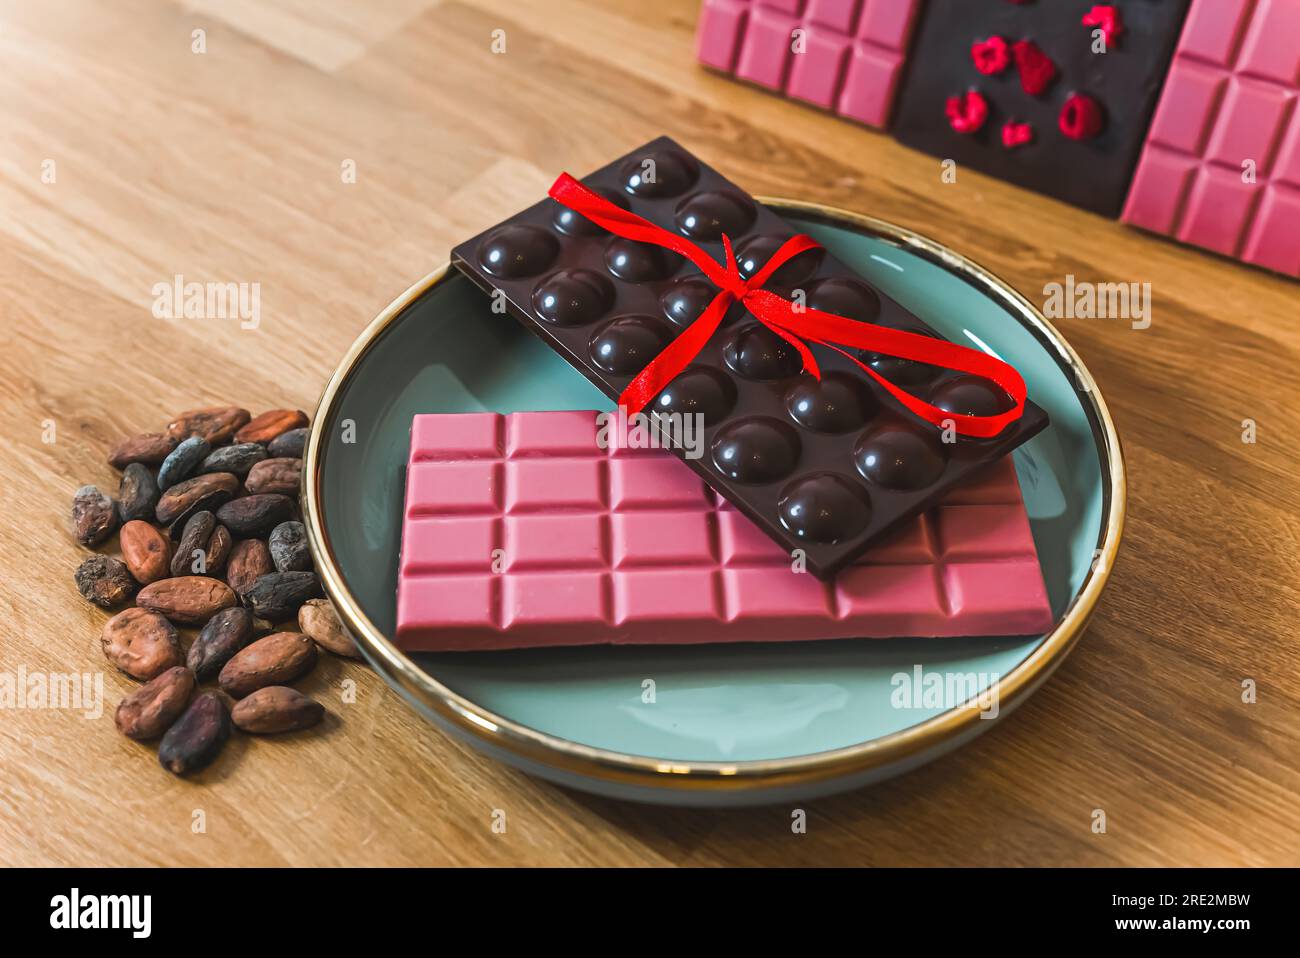 Bars of ruby and dark chocolate artfully arrenged on blue plate. Premium chocolate tied with red ribbon presented next to cocoa seeds. High quality photo Stock Photo